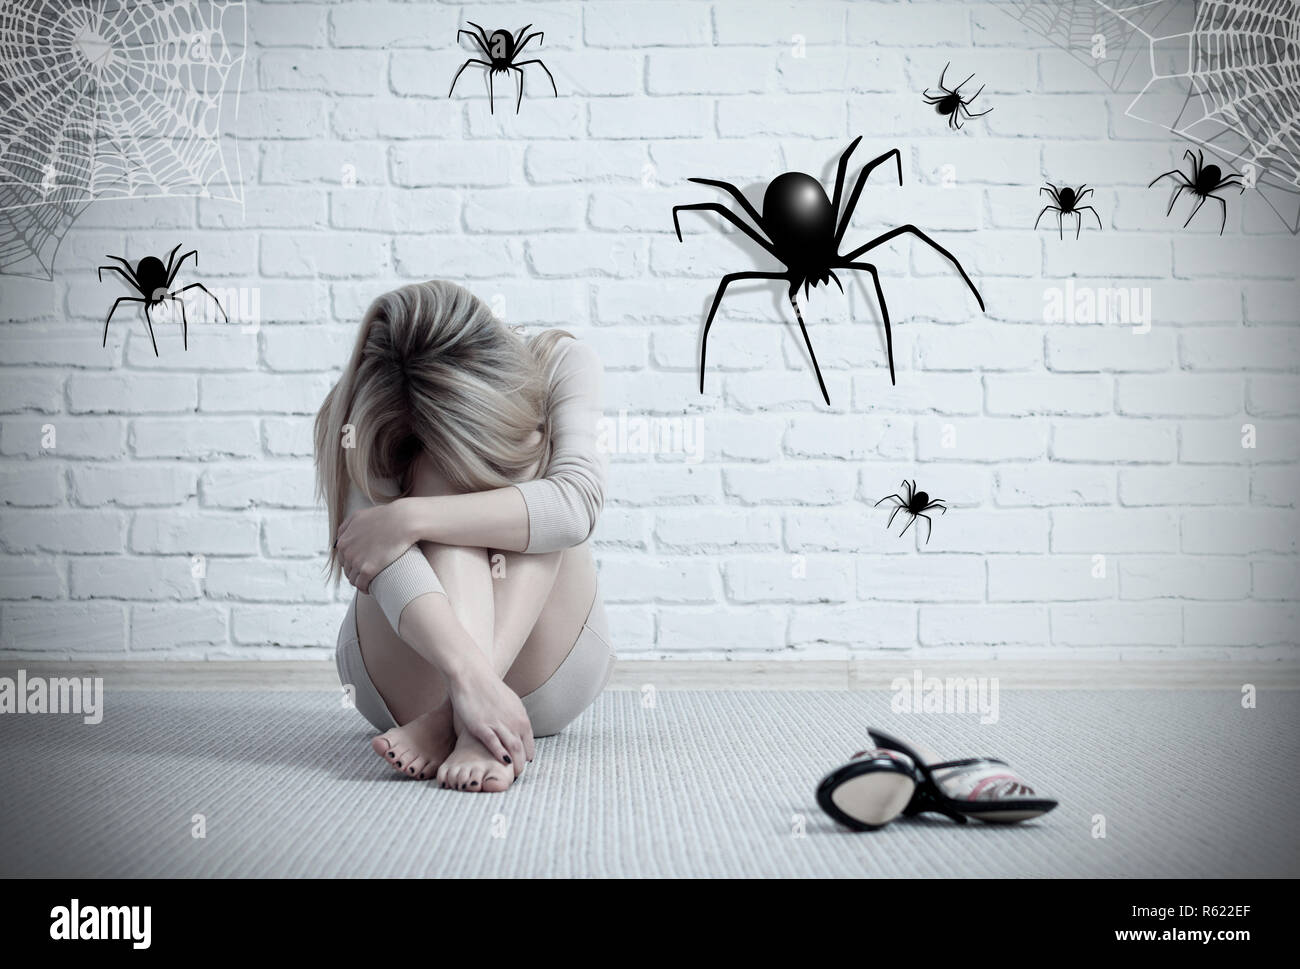 Woman sitting on the floor and looking on imaginary spider. Stock Photo